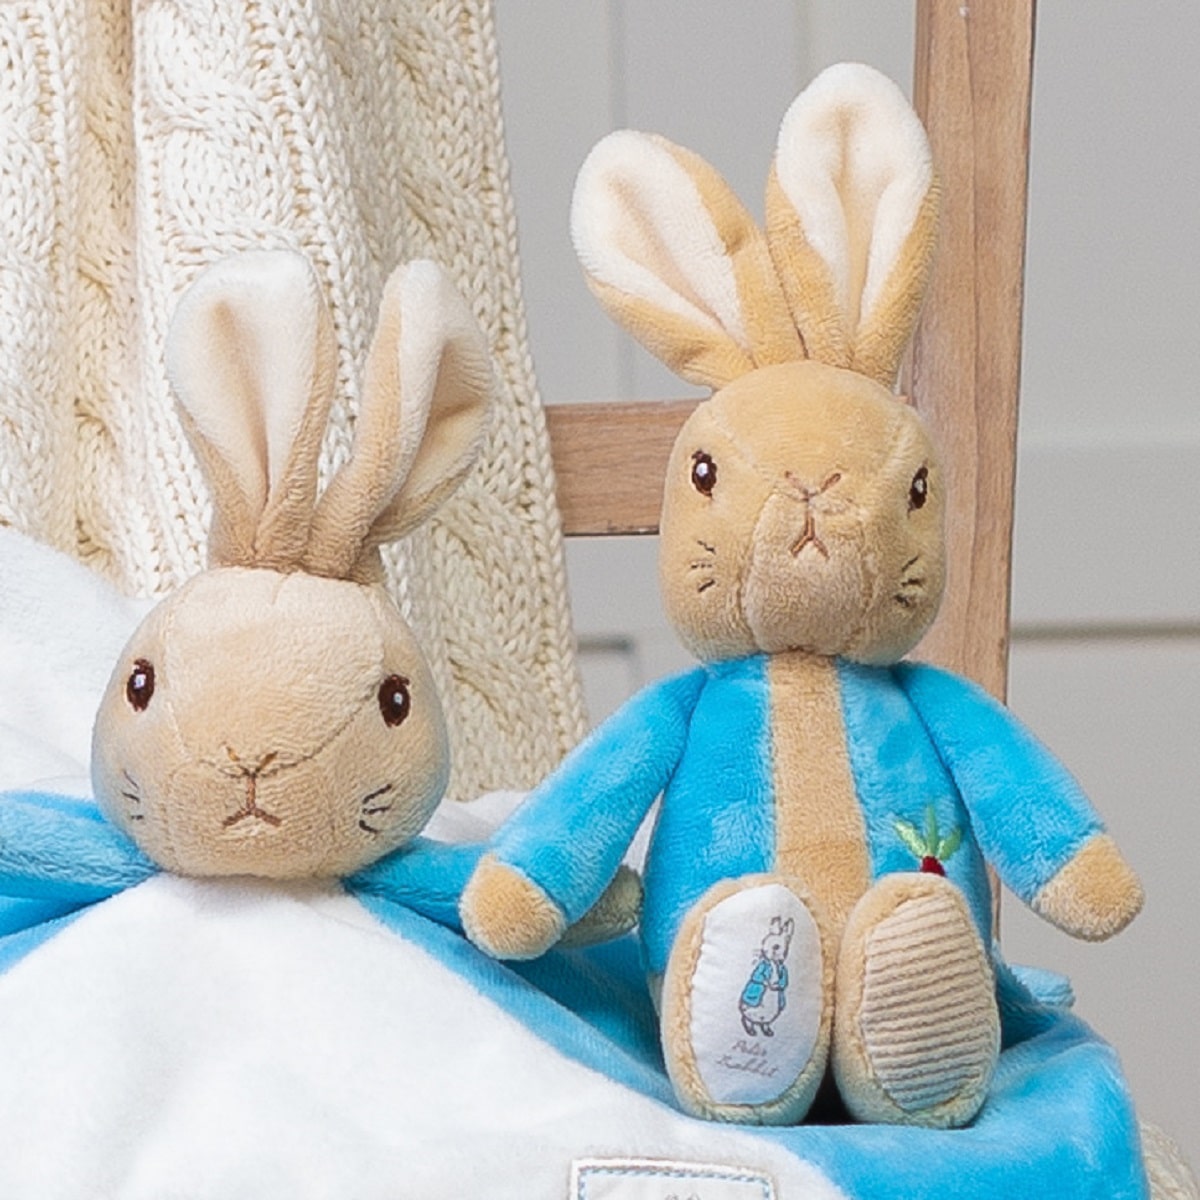 PETER RABBIT PERSONALISED BABY GIFTS